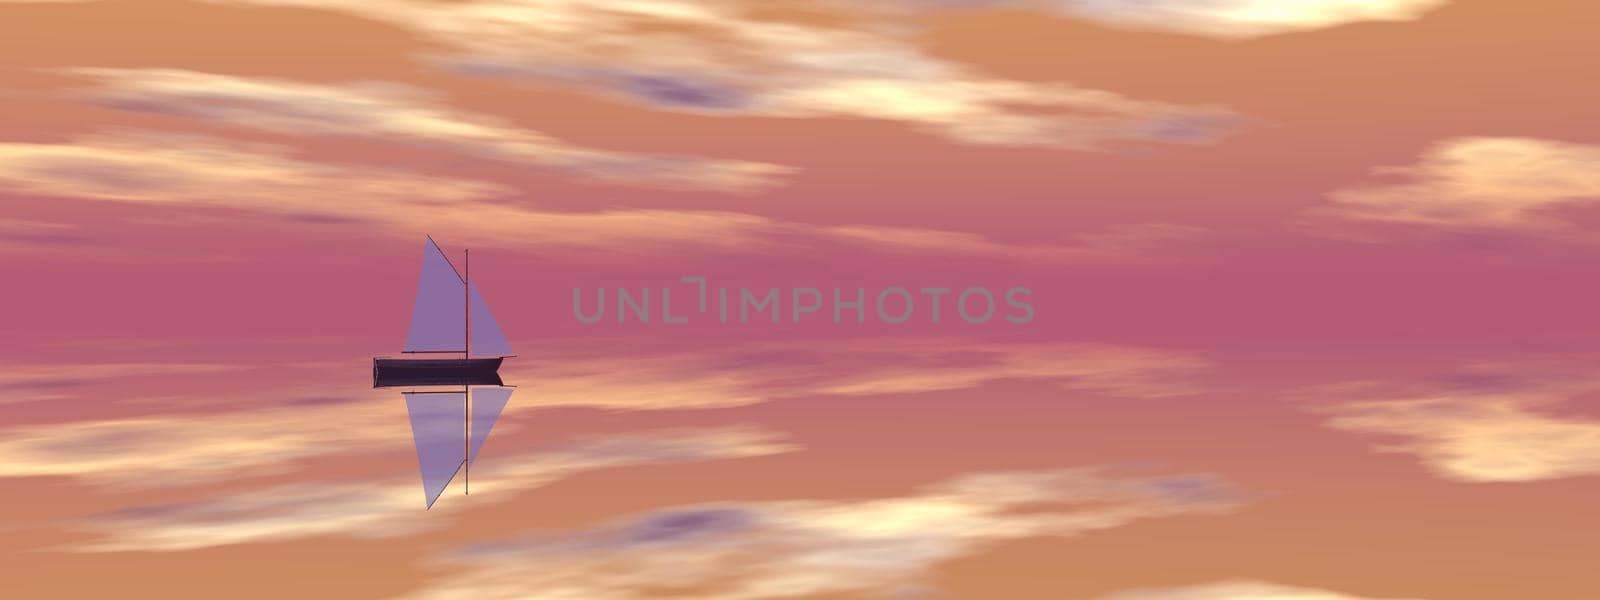 very beautiful sailboat on the sea with very beautiful landscape - 3d rendering by mariephotos